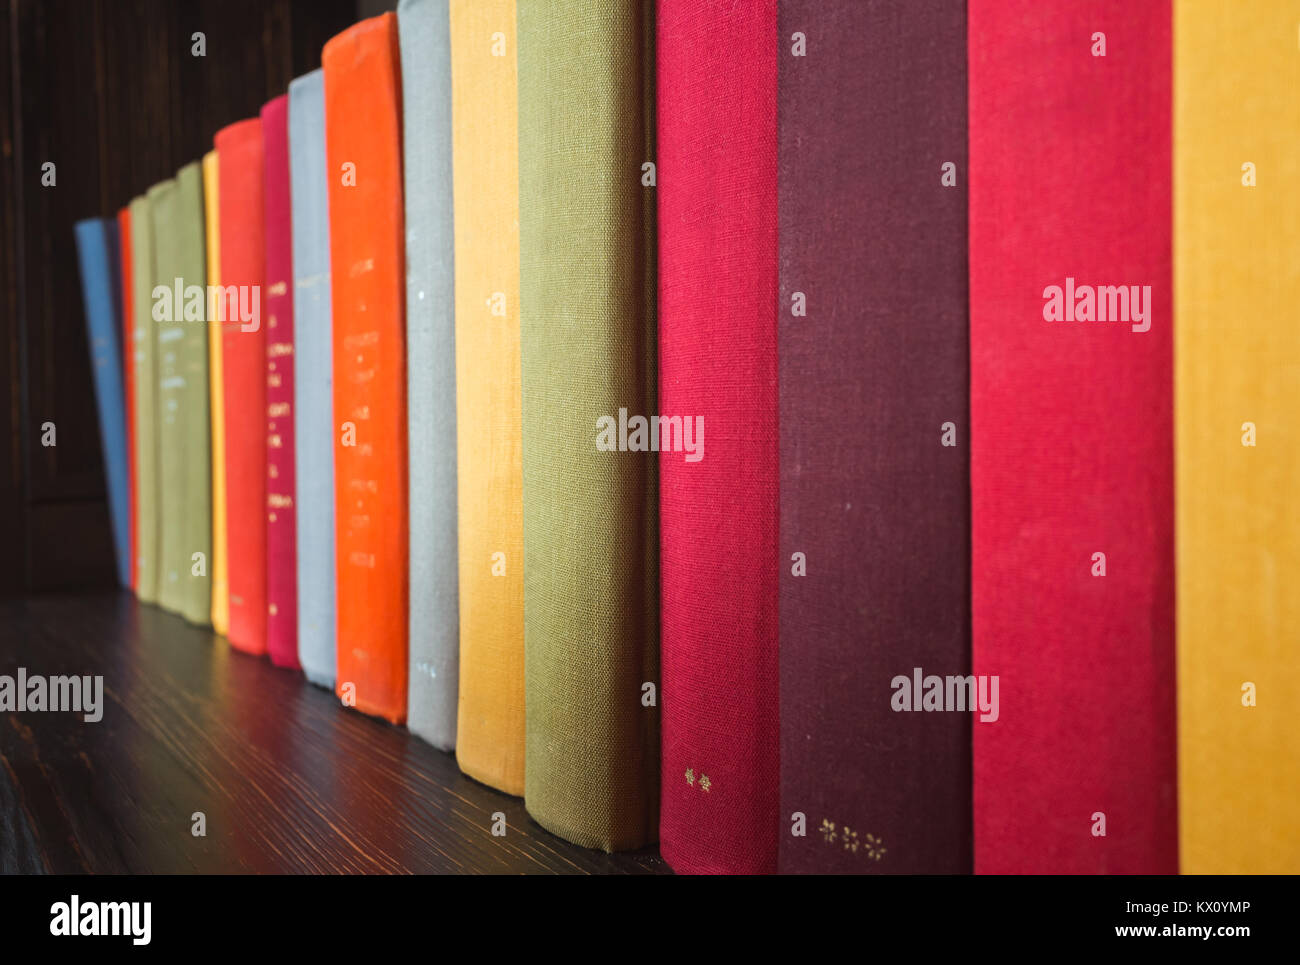 Old books in colorful covers stand on wooden shelf Stock Photo